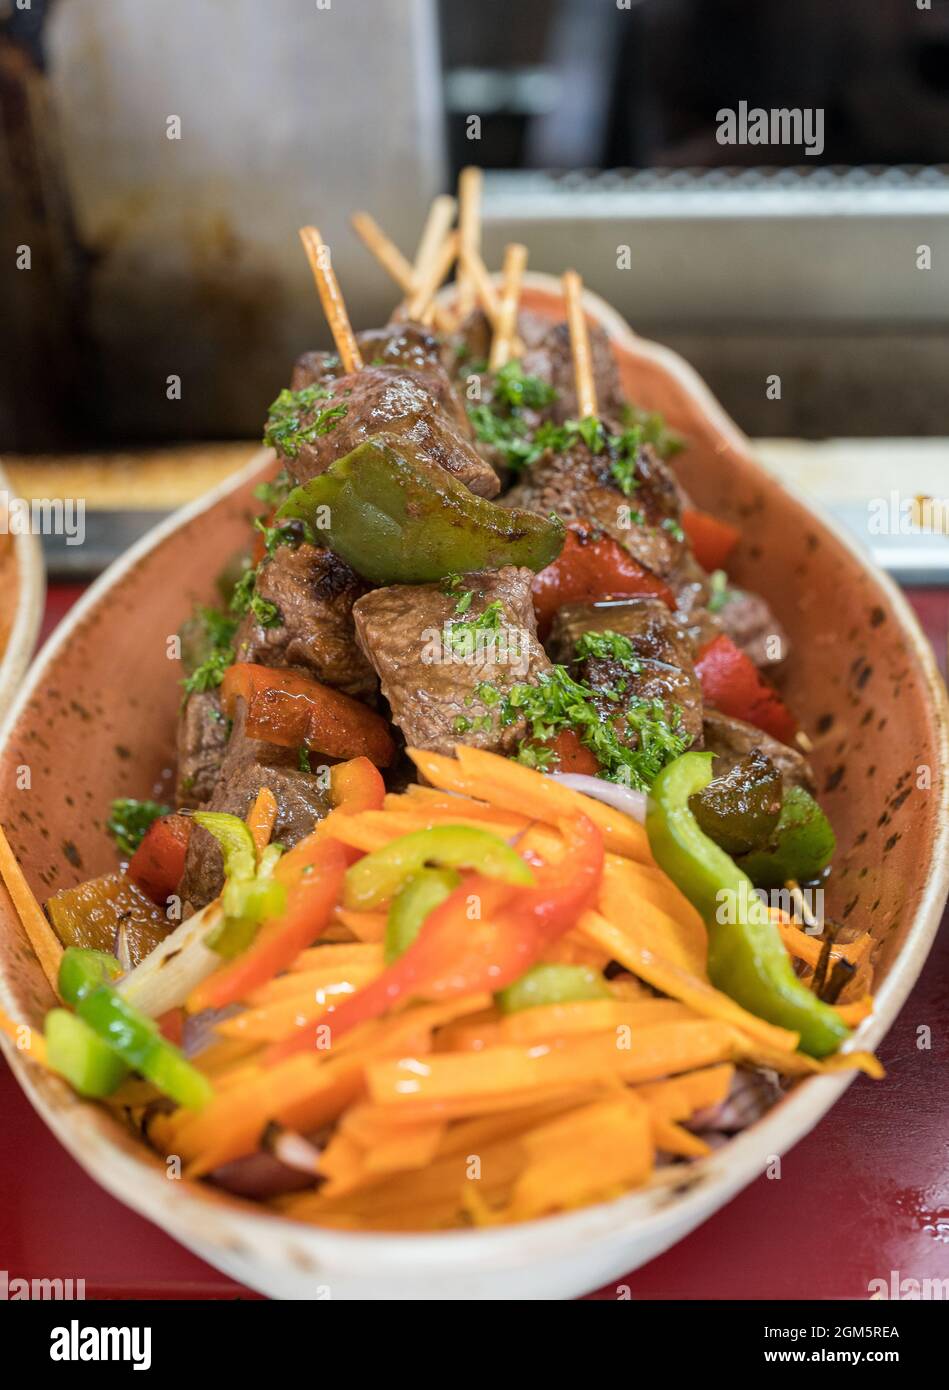 Tasty Beef Shish Kebab Garnished with Roasted Peppers and Served in a Bowl. Stock Photo